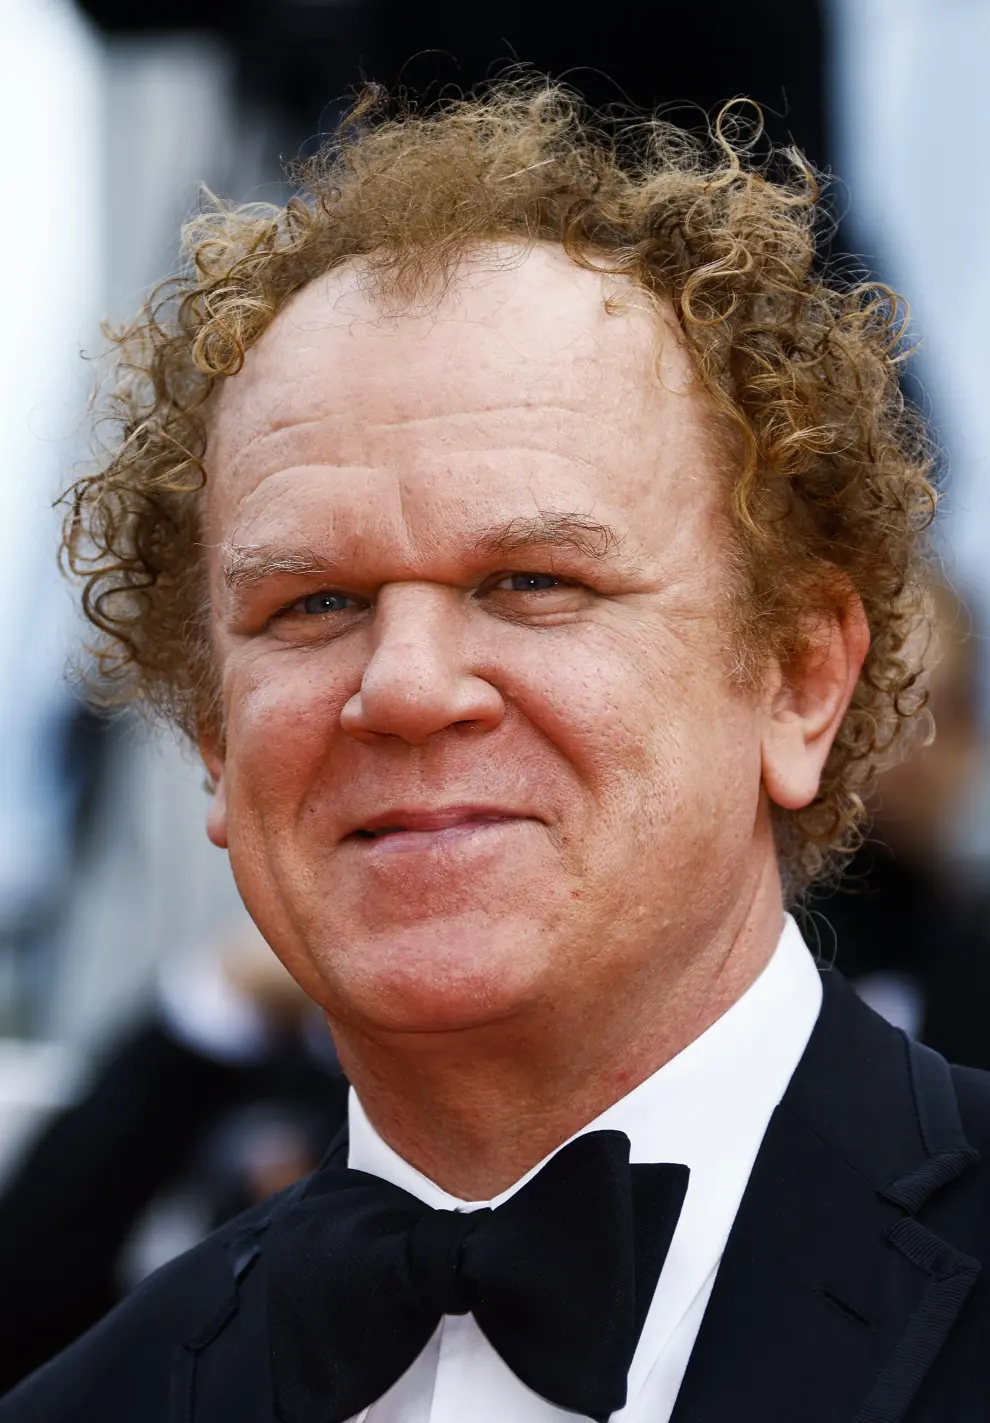 The 76th Cannes Film Festival - Opening ceremony and screening of the film "Jeanne du Barry" Out of competition - Red Carpet arrivals - Cannes, France, May 16, 2023. John C. Reilly, President of Un Certain Regard Jury, and Jury members Alice Winocour, Paula Beer, Davy Chou and Emilie Dequenne pose. REUTERS/Sarah Meyssonnier FILMFESTIVAL-CANNES/OPENING RED CARPET